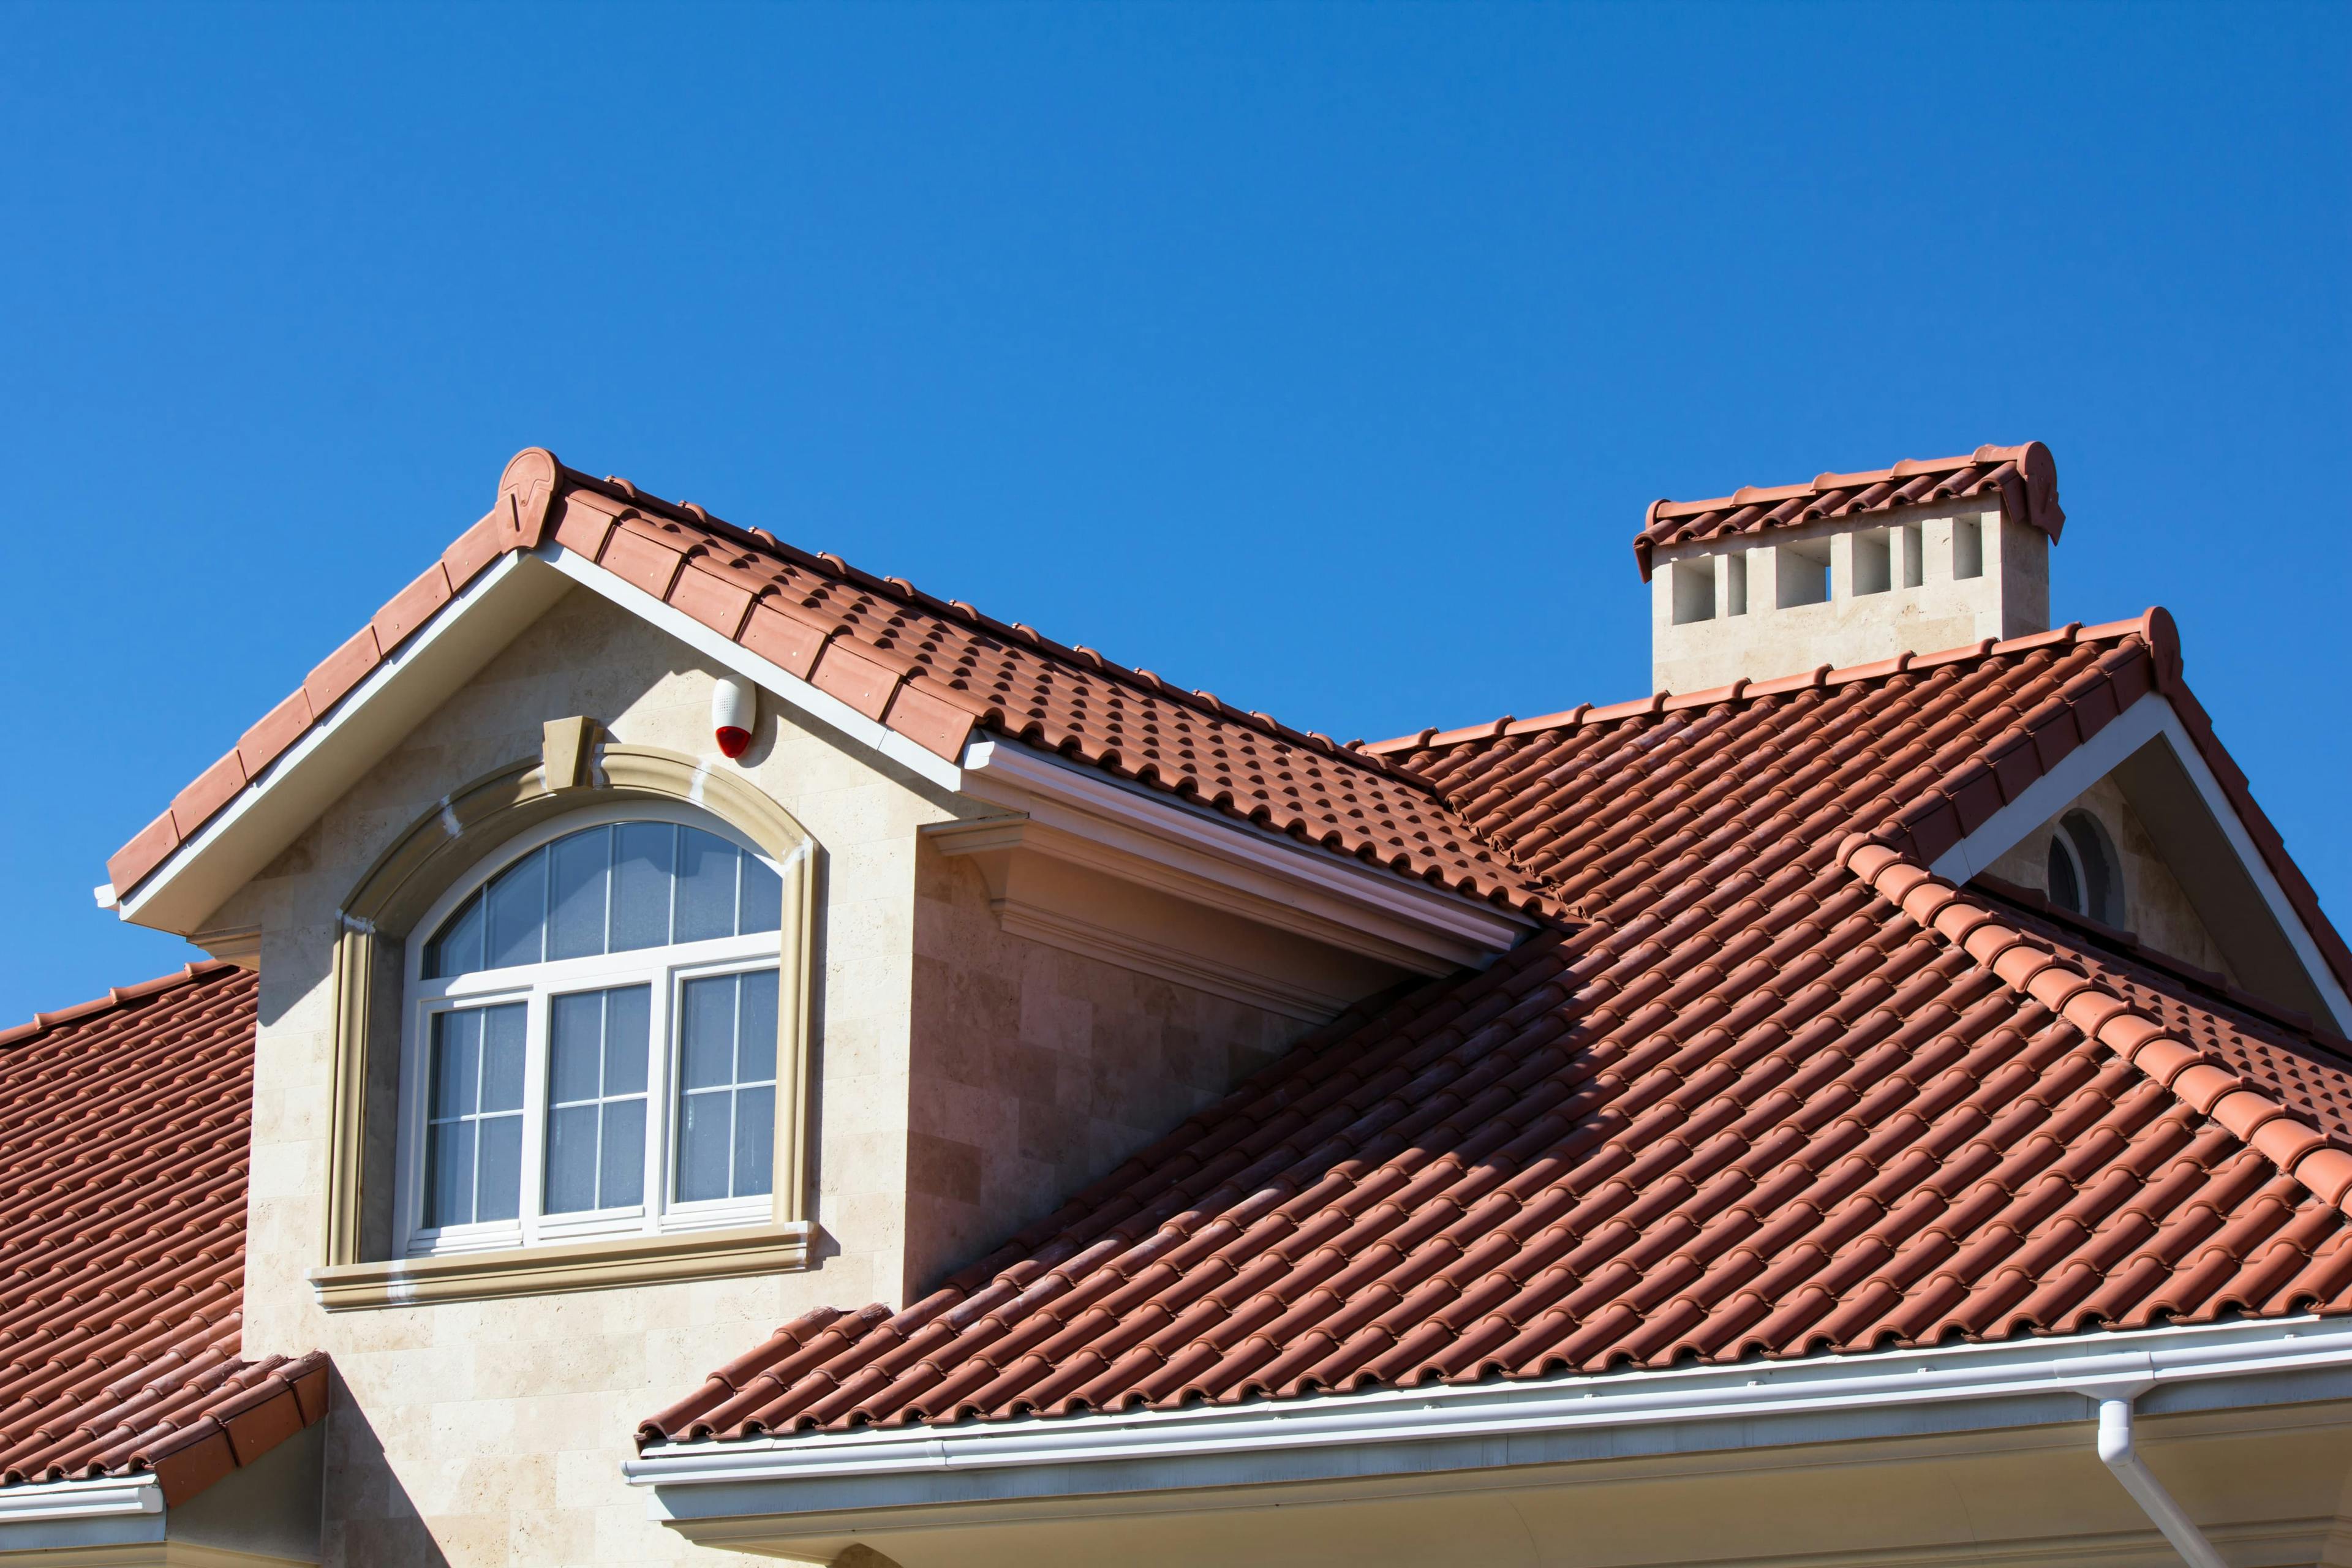 Specialty Roofing | Terracotta Roof Tile Specialty Roofing | Specialty Residential | Specialty Commercial